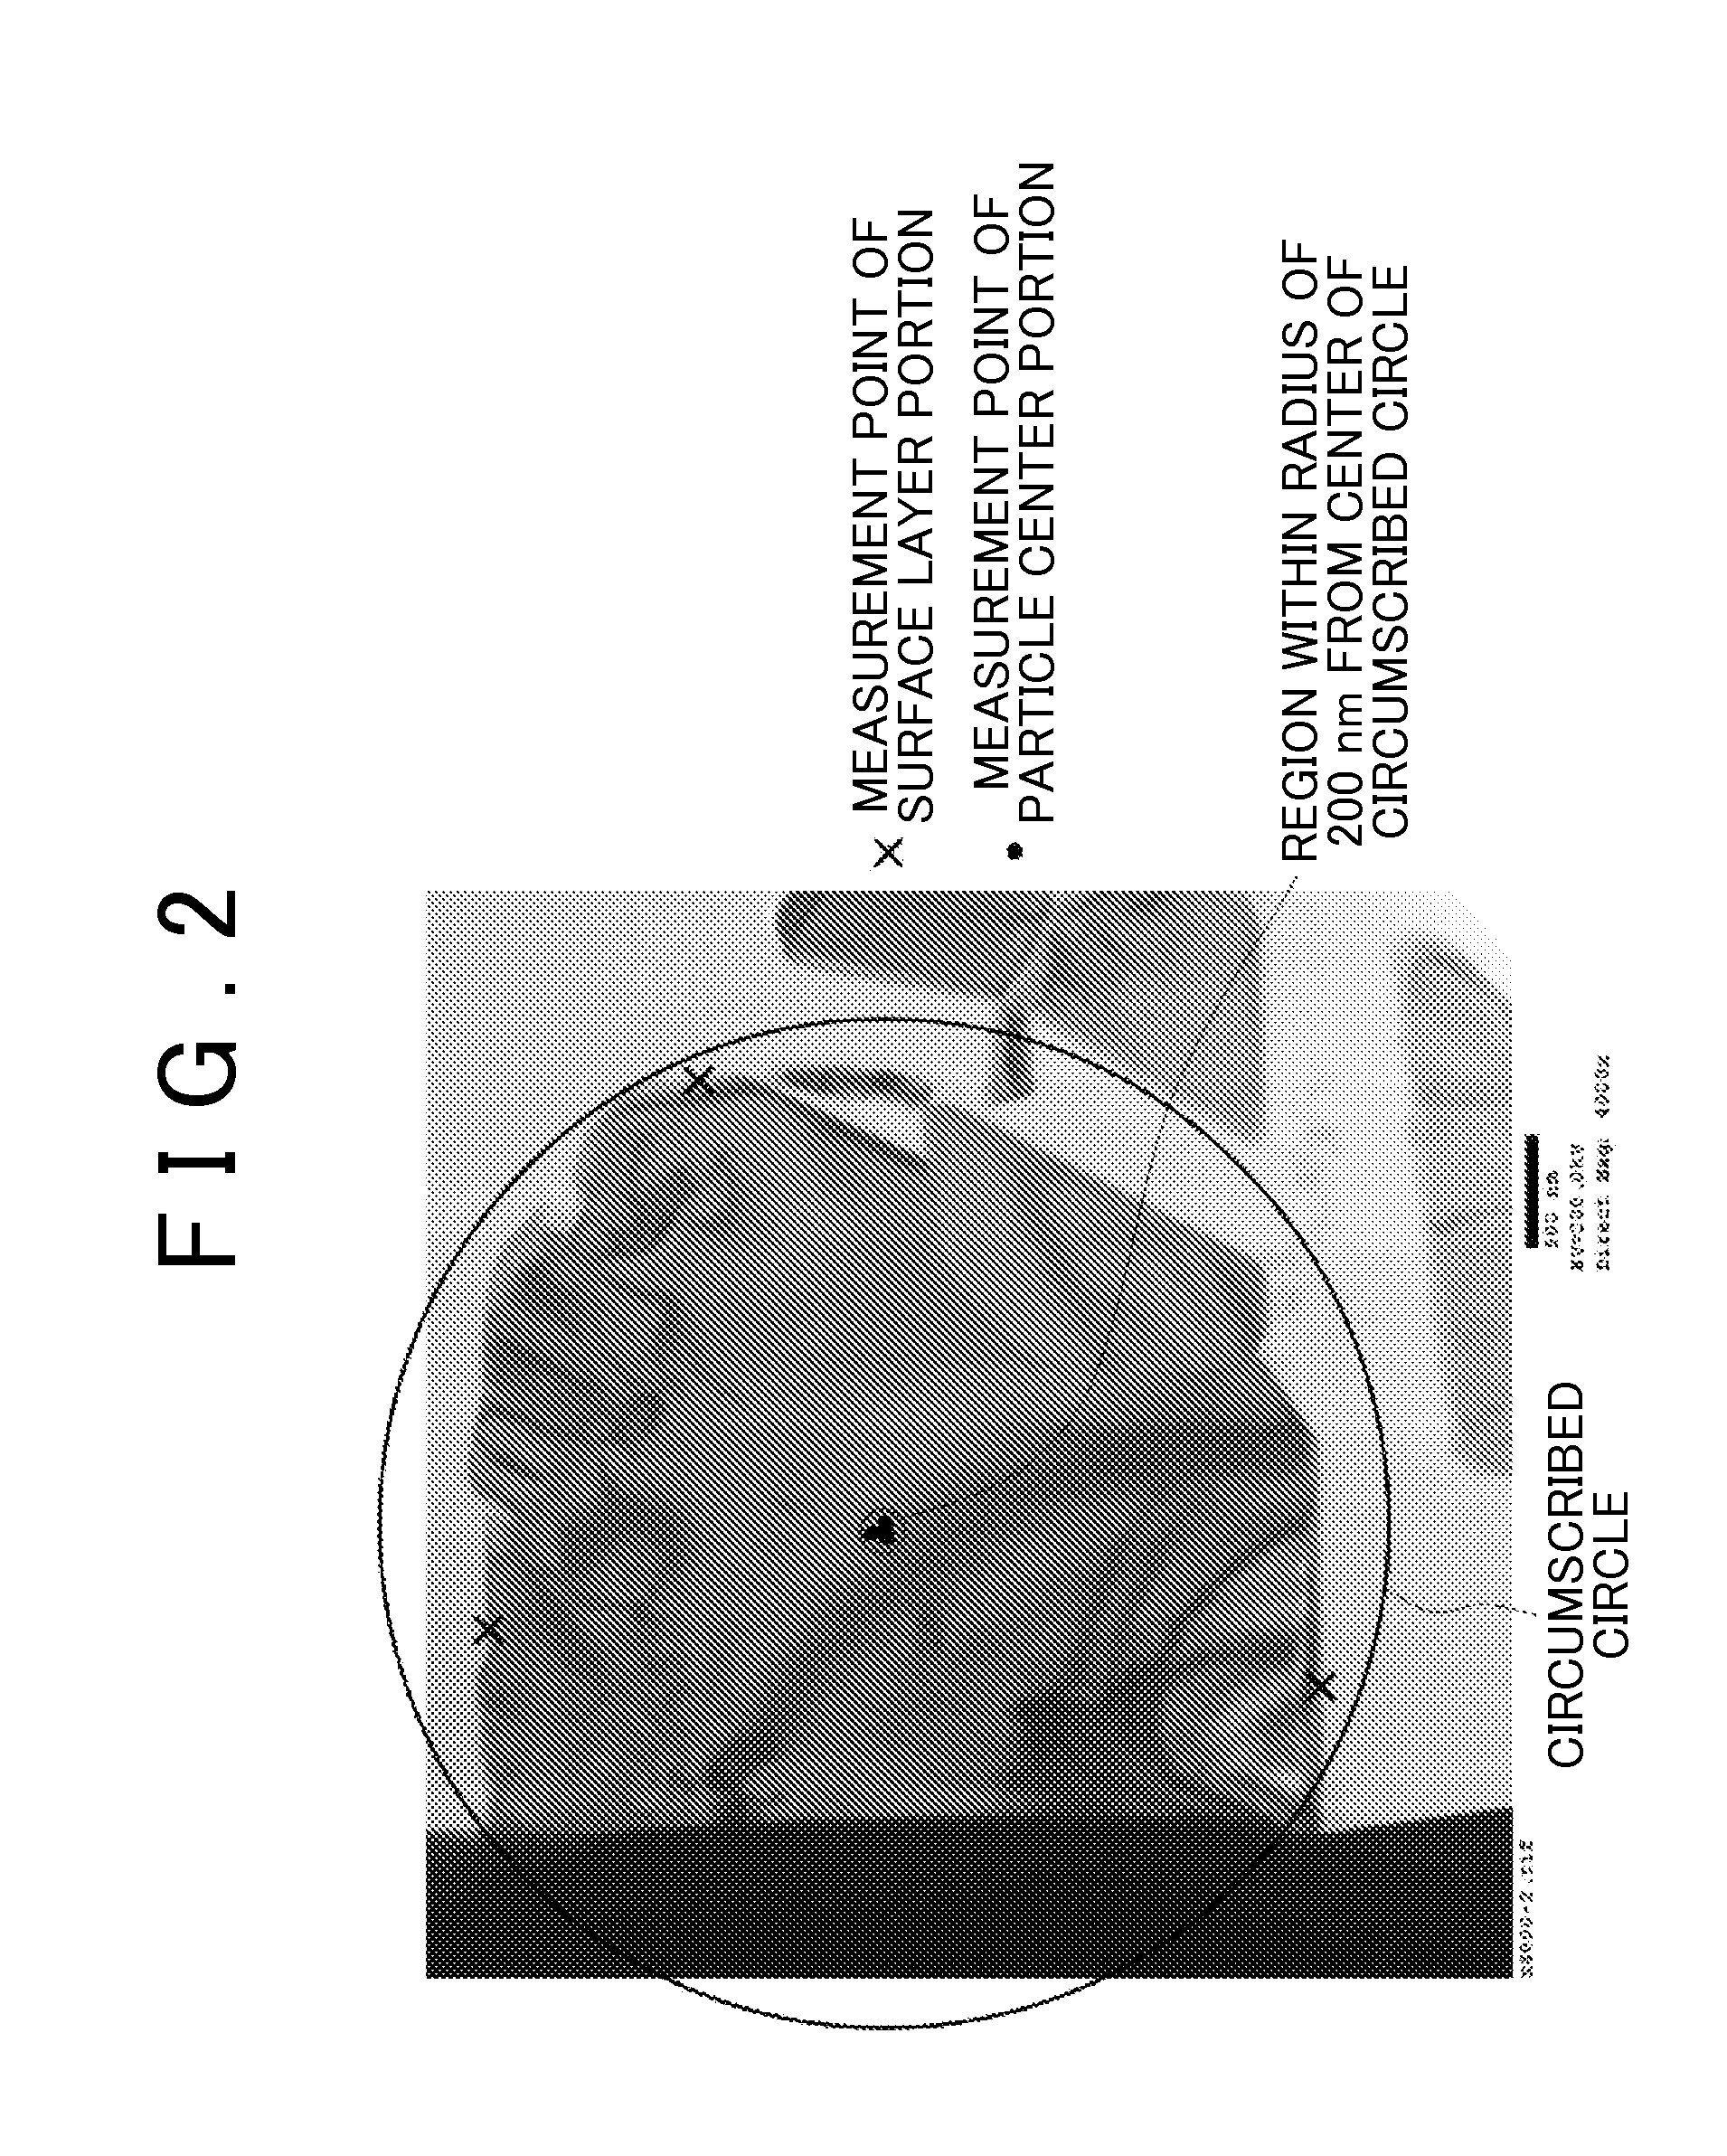 Positive active material for lithium-ion secondary battery,
positive electrode for lithium-ion secondary battery, and
lithium-ion secondary battery